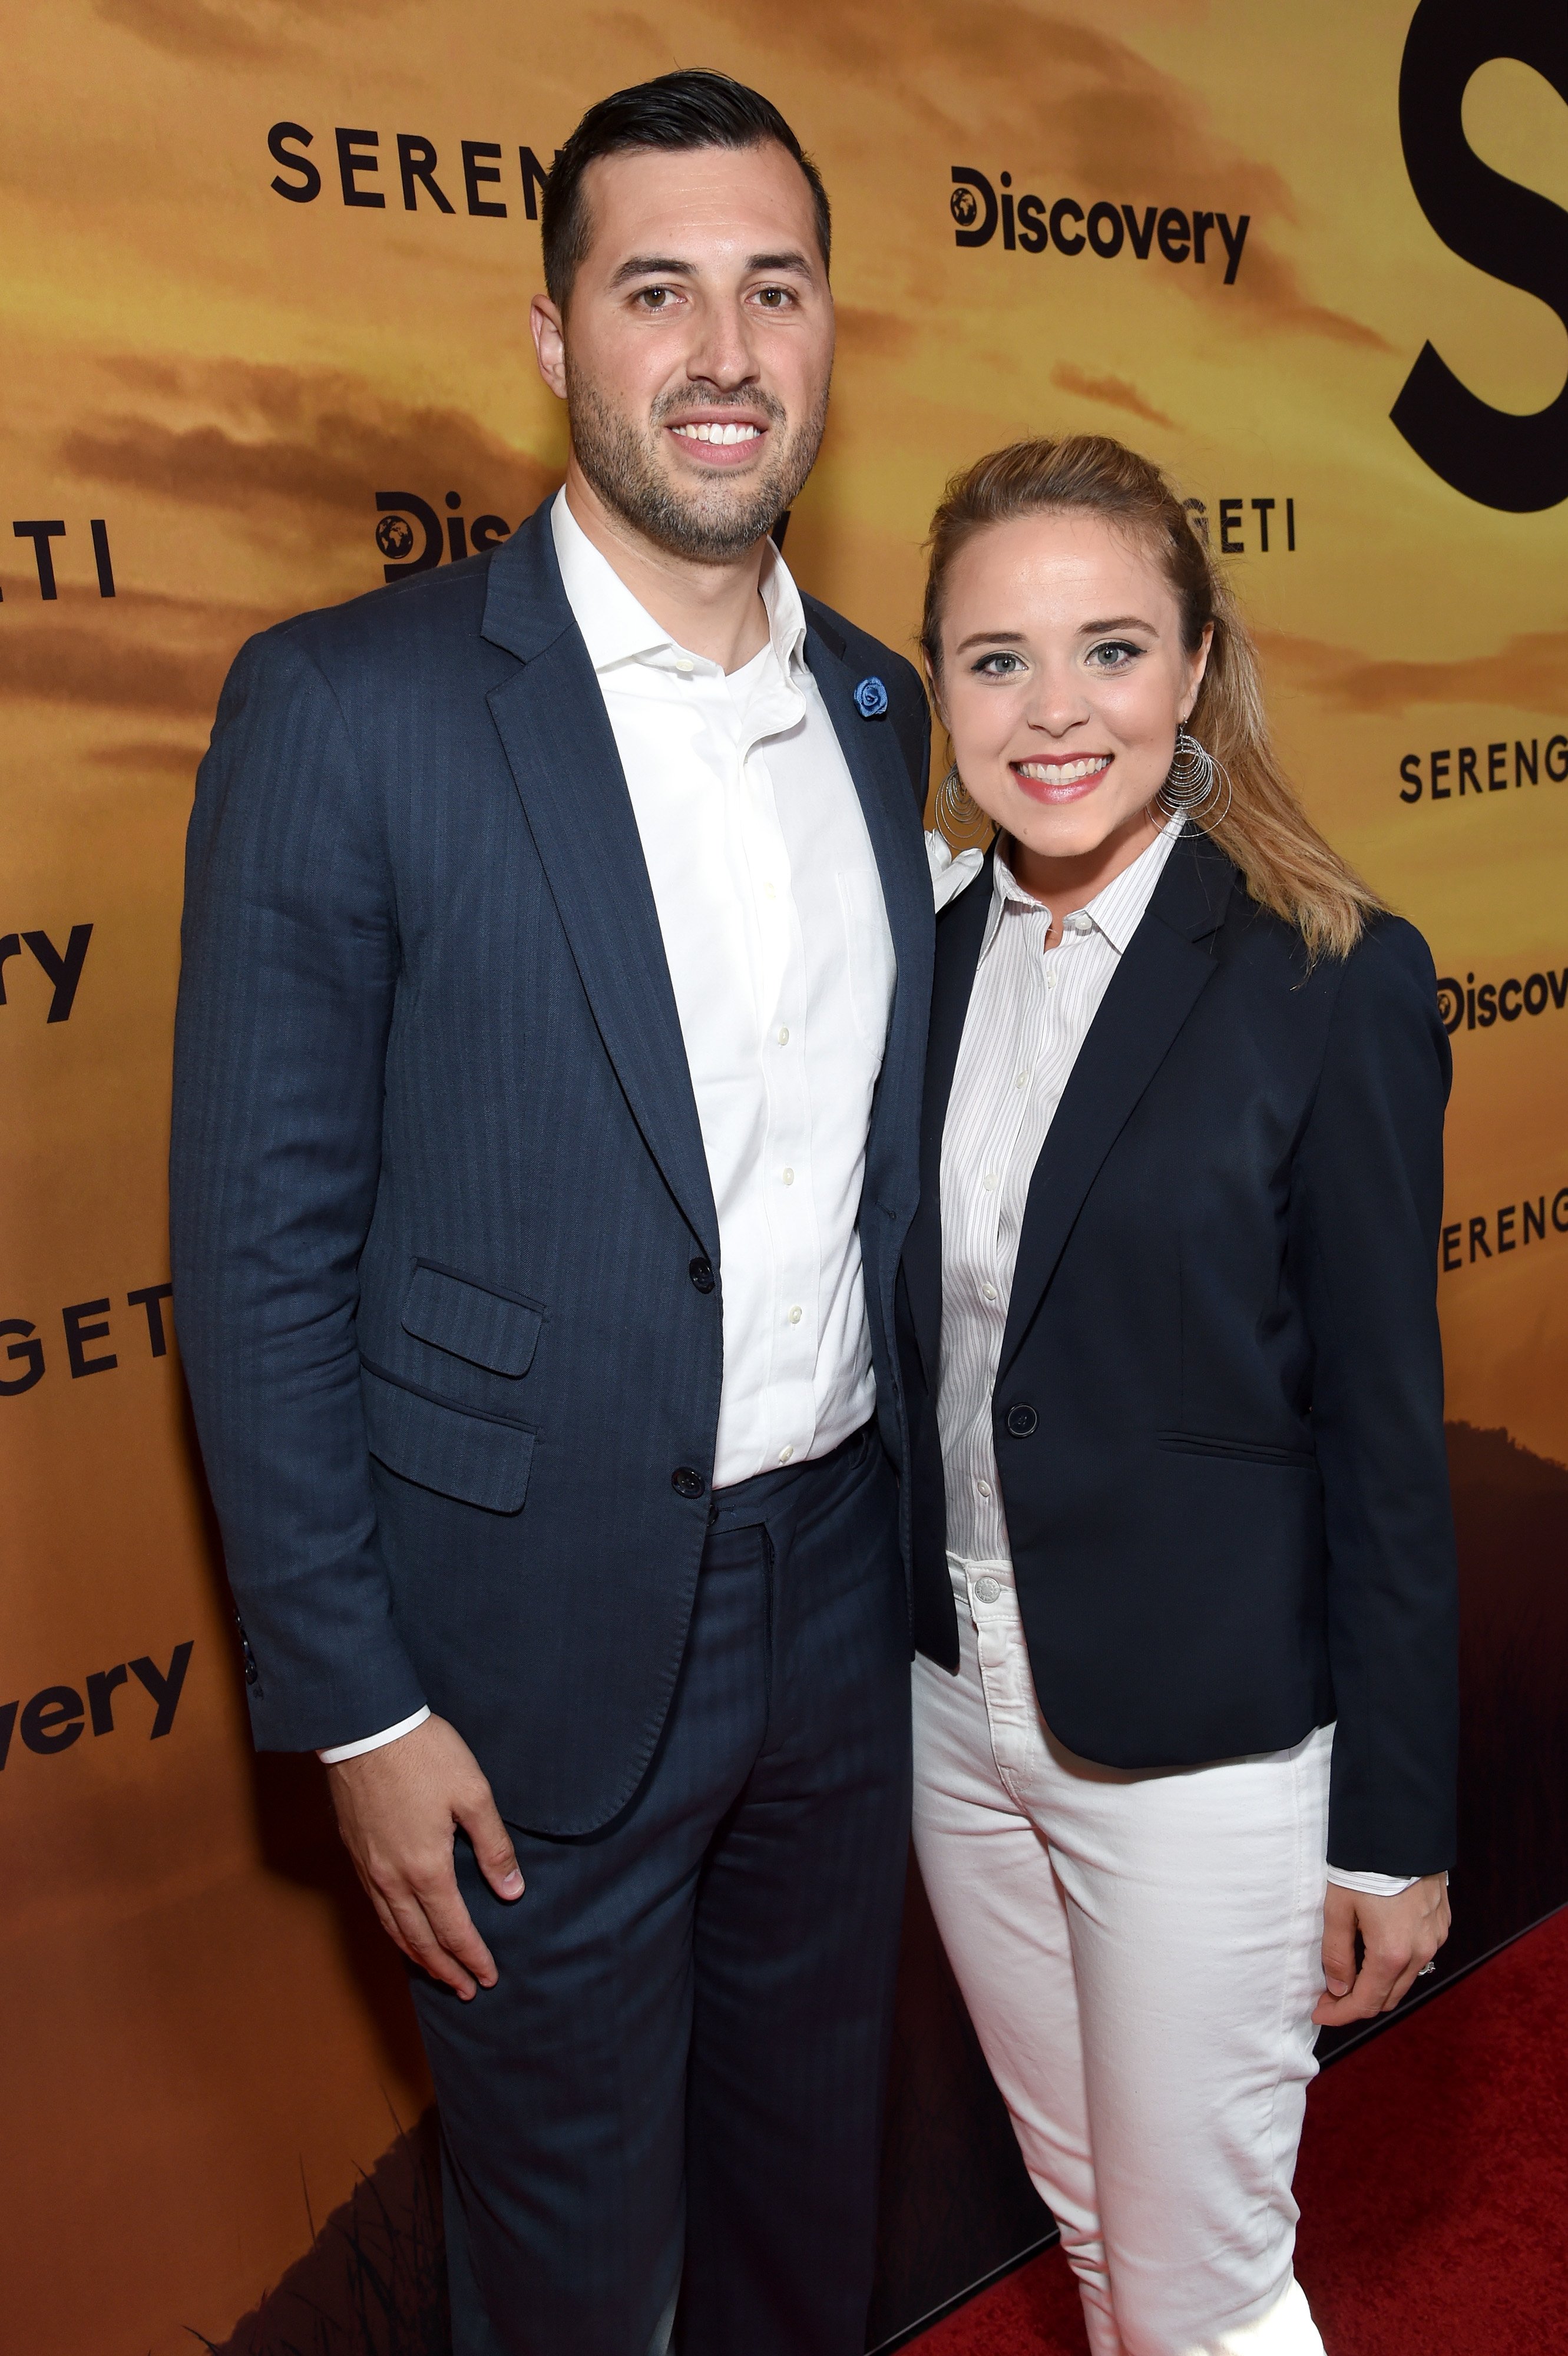 Jeremy Vuolo and Jinger Duggar attend the premiere of "Serengeti" in Beverly Hills, July, 2019. | Photo: Getty Images.